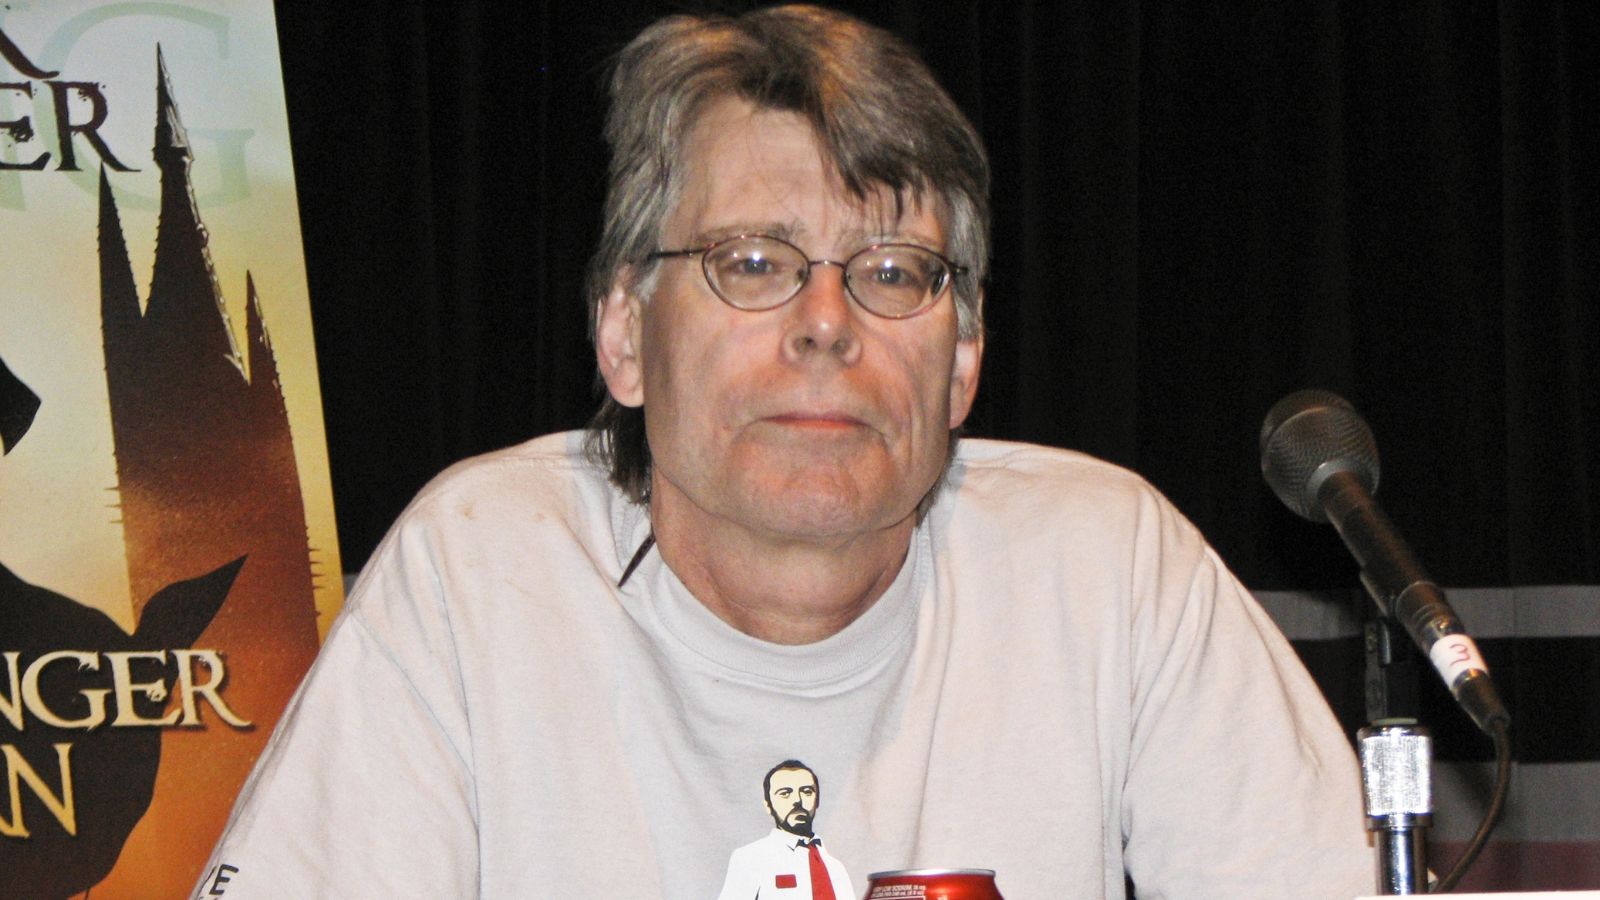 “He’s MAGA’s Fuhrer”: Author Stephen King Hits Out at “Crook” Donald Trump, in Online Exchange